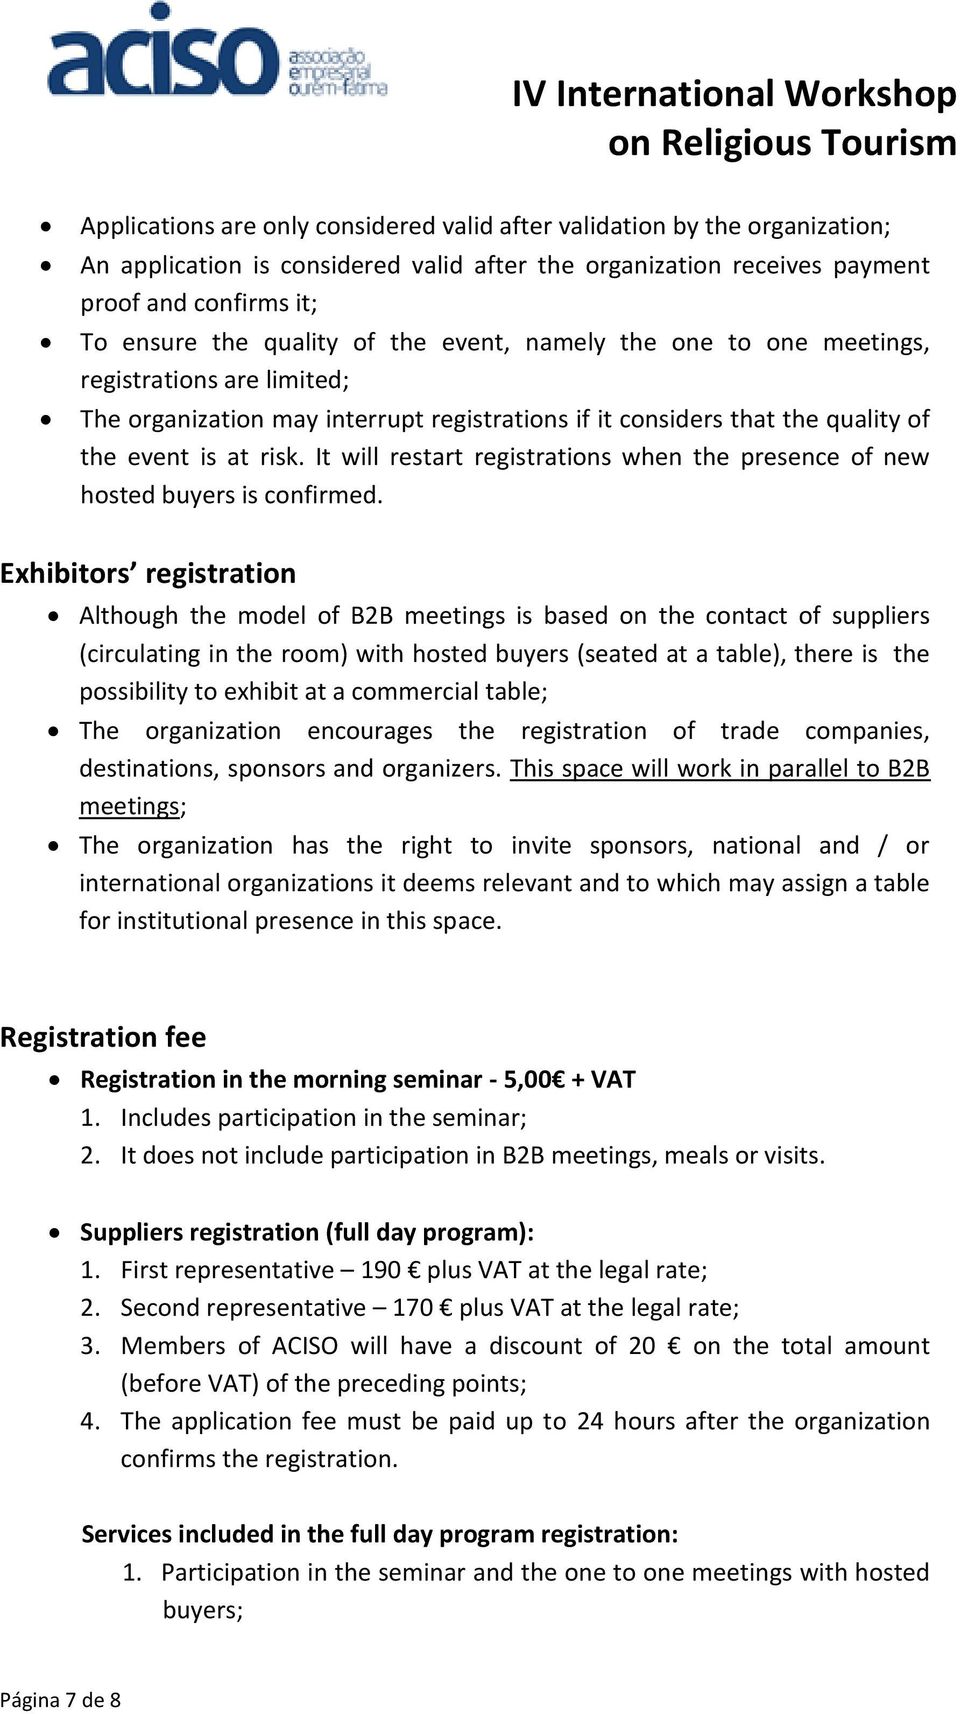 registrations if it considers that the quality of the event is at risk. It will restart registrations when the presence of new hosted buyers is confirmed.